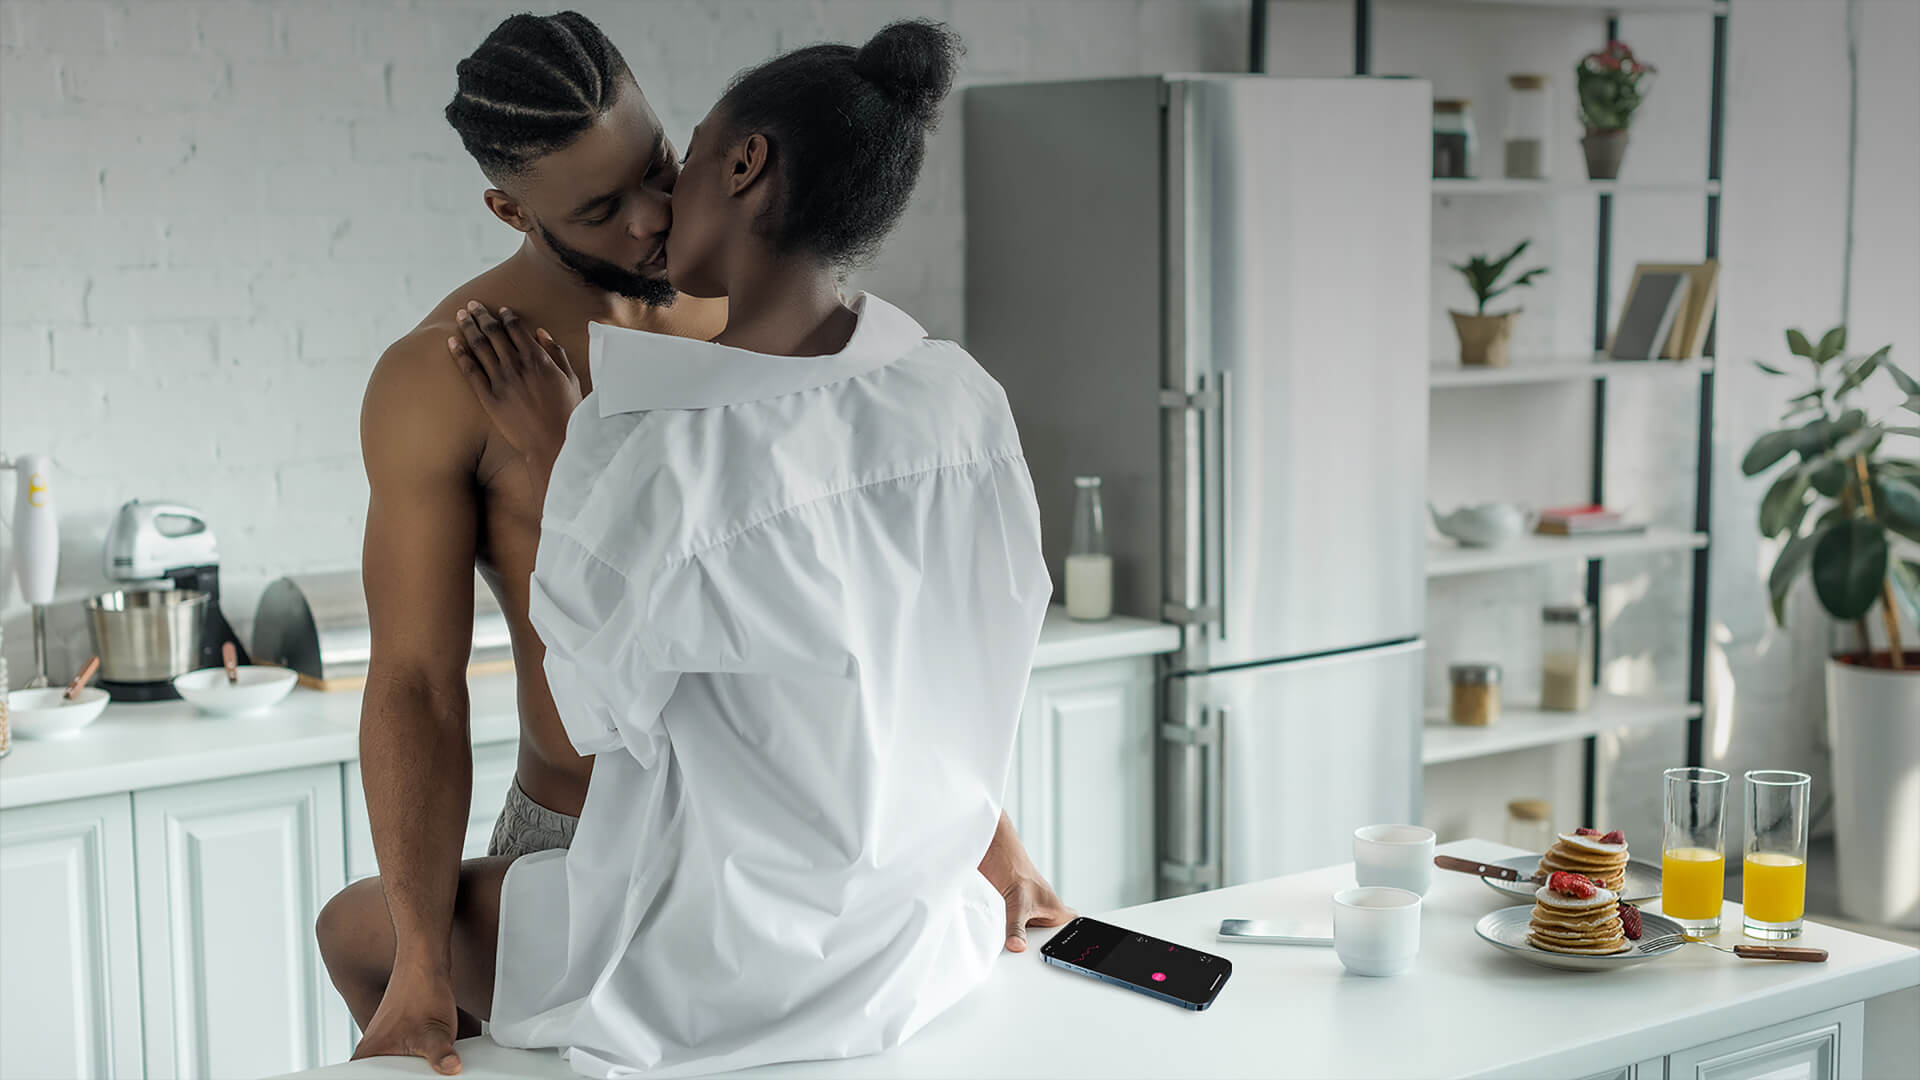 lovense ferri - foreplay in the kitchen- a naked black man making out with a black women in white shirt with his left hand controlling her ferri on the lovense remote app